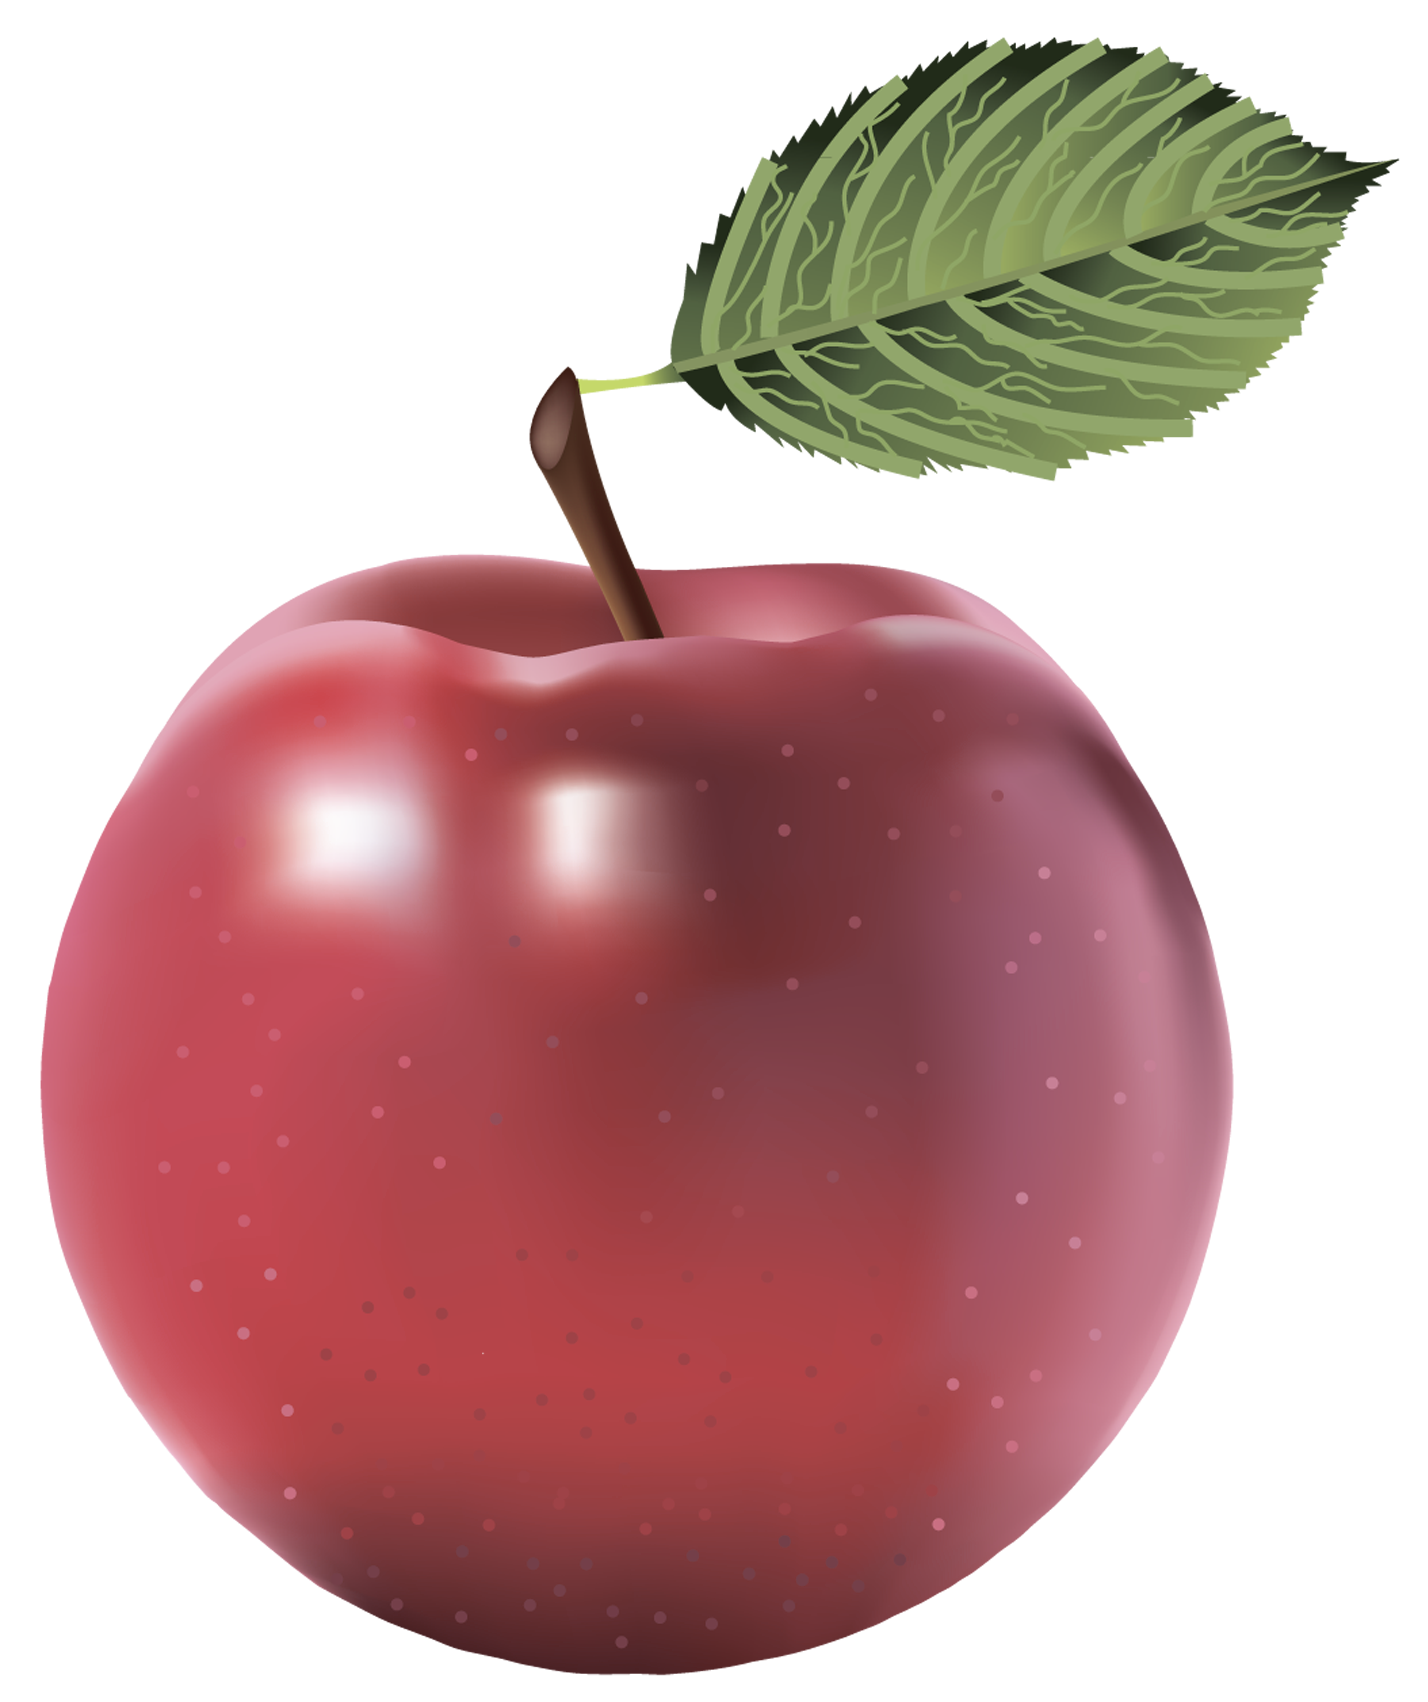  Apple's PNG Image